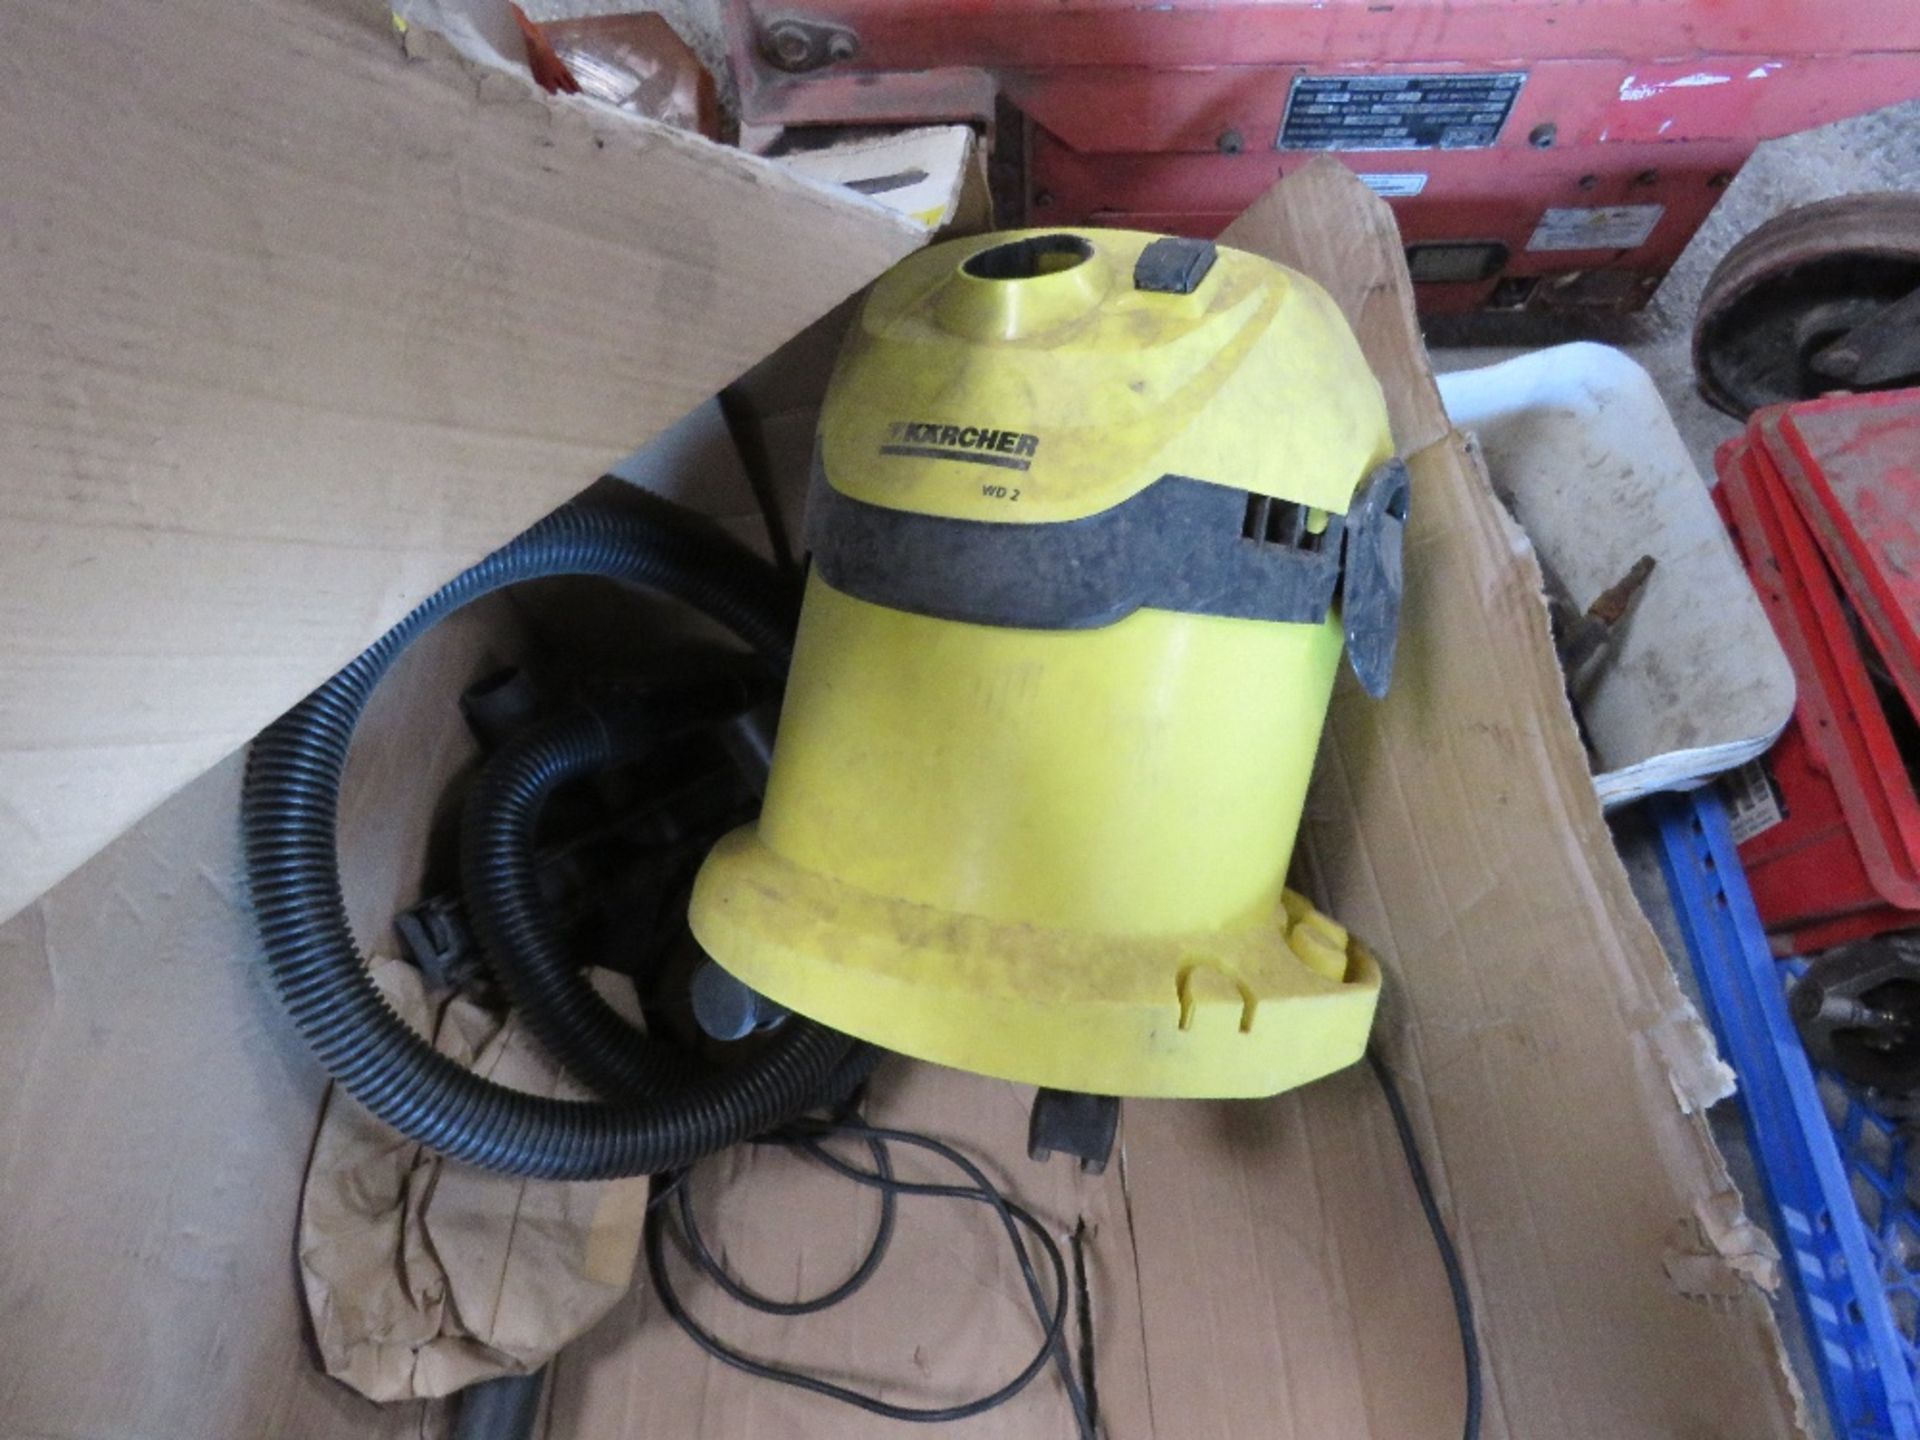 KARCHER VAC UNIT IN BOX. SOURCED FROM DEPOT CLOSURE. - Image 2 of 2